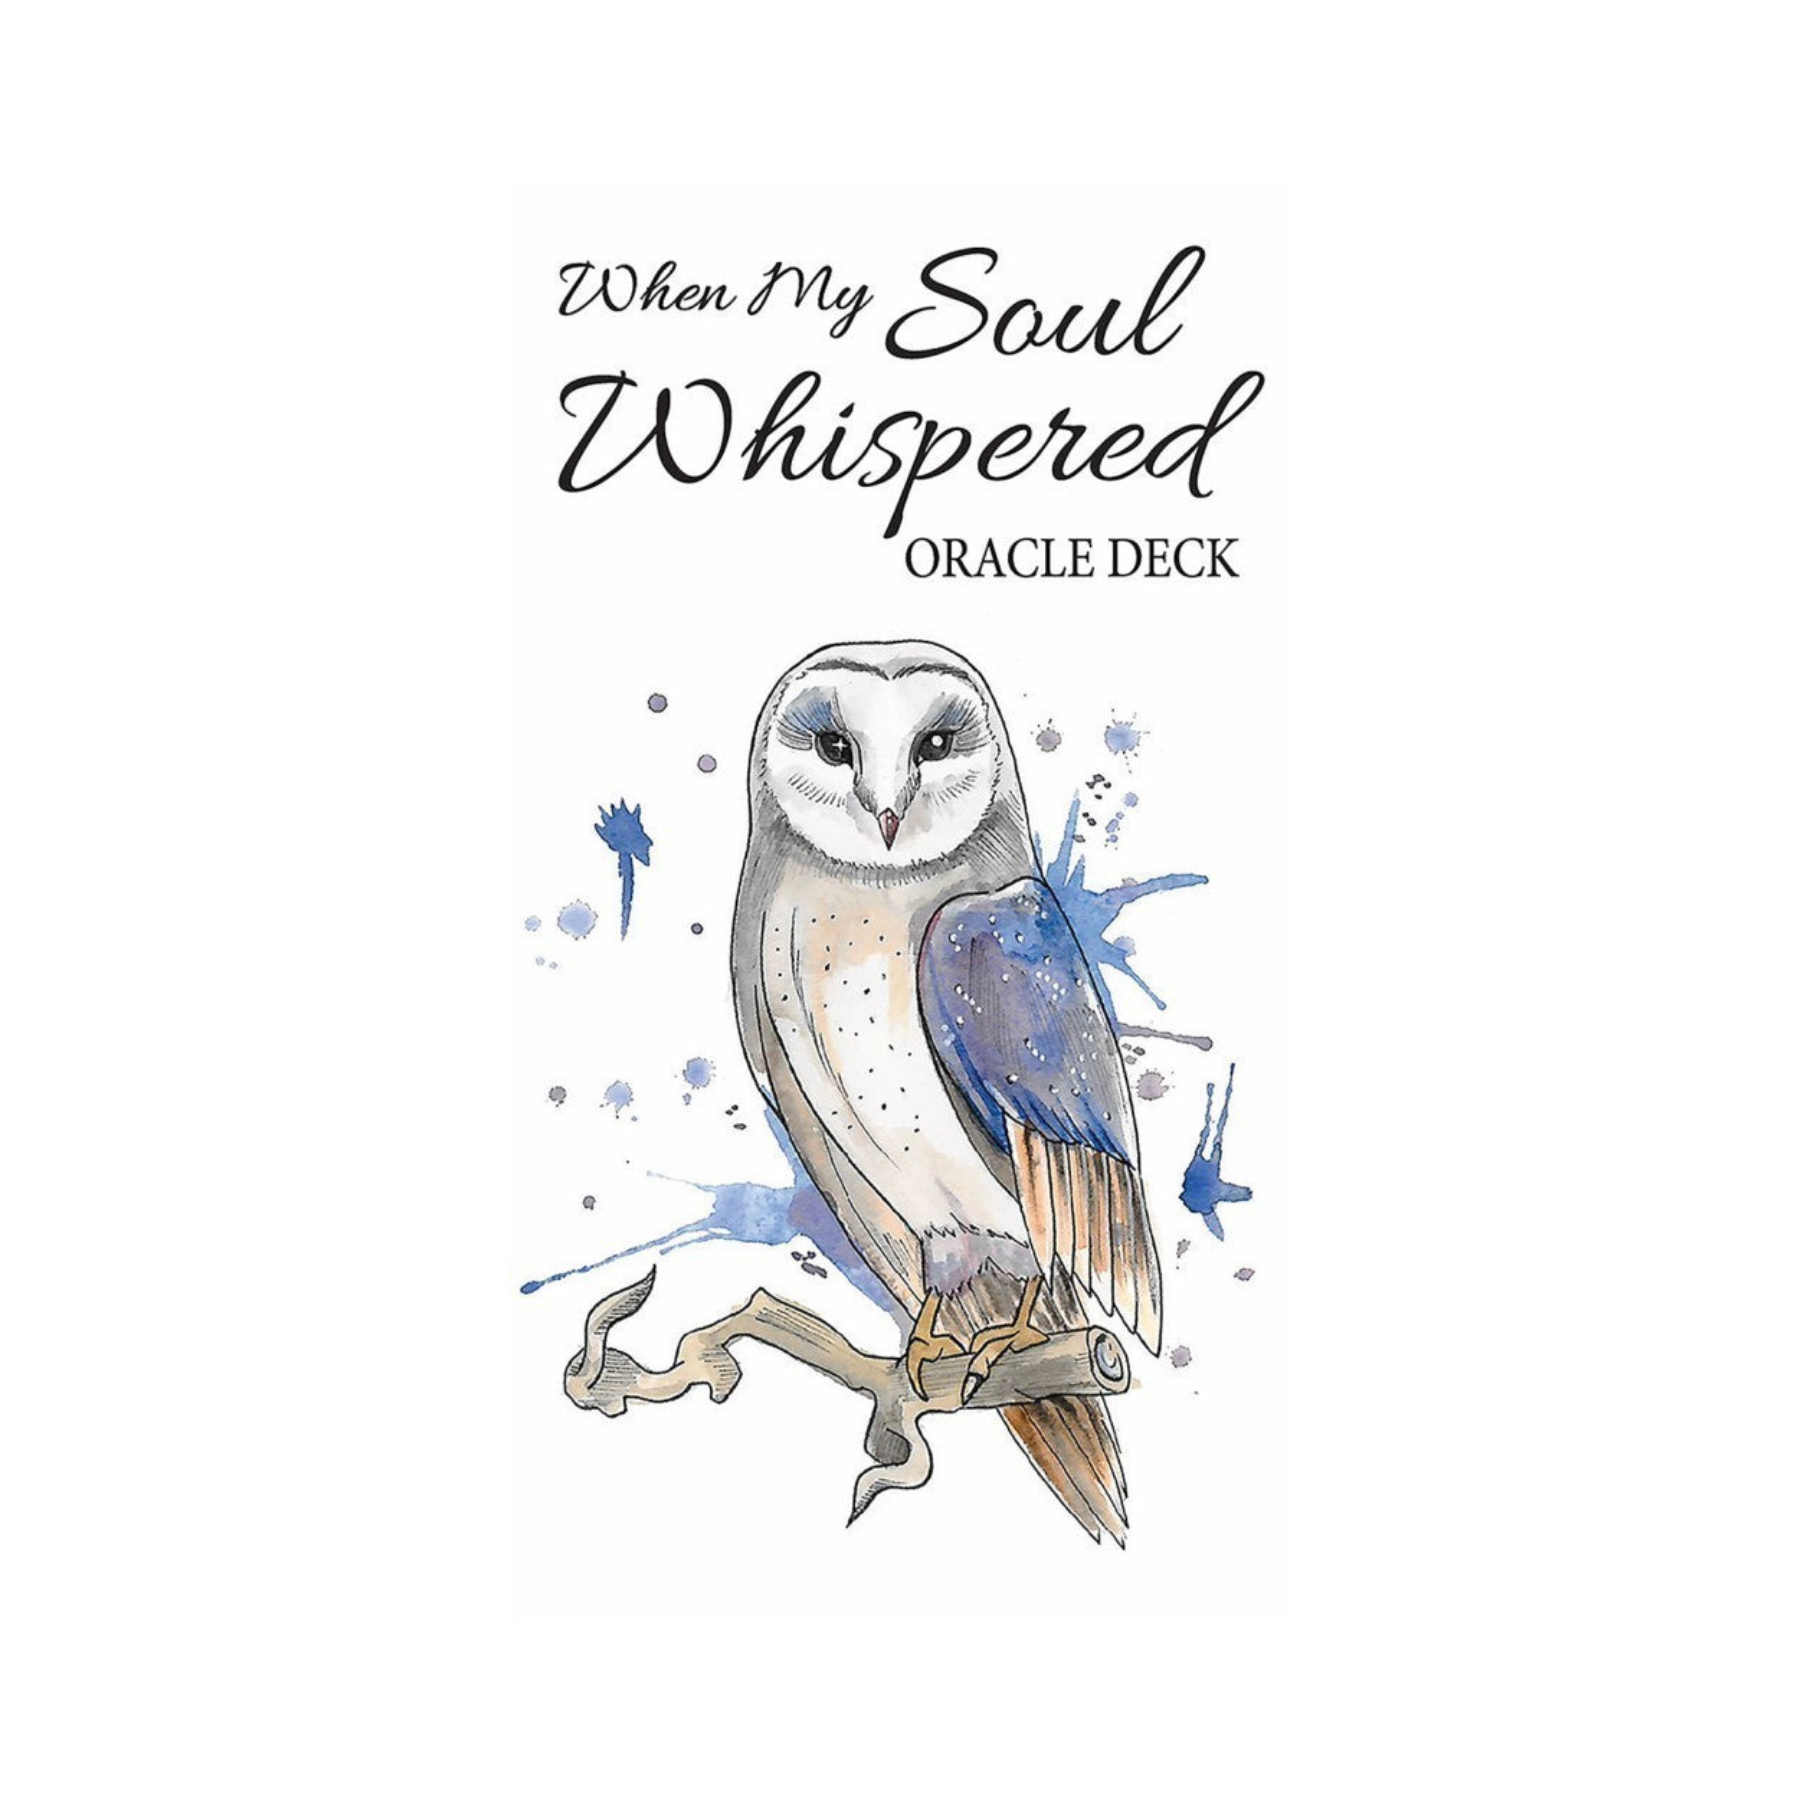 When my Soul Whispered Oracle